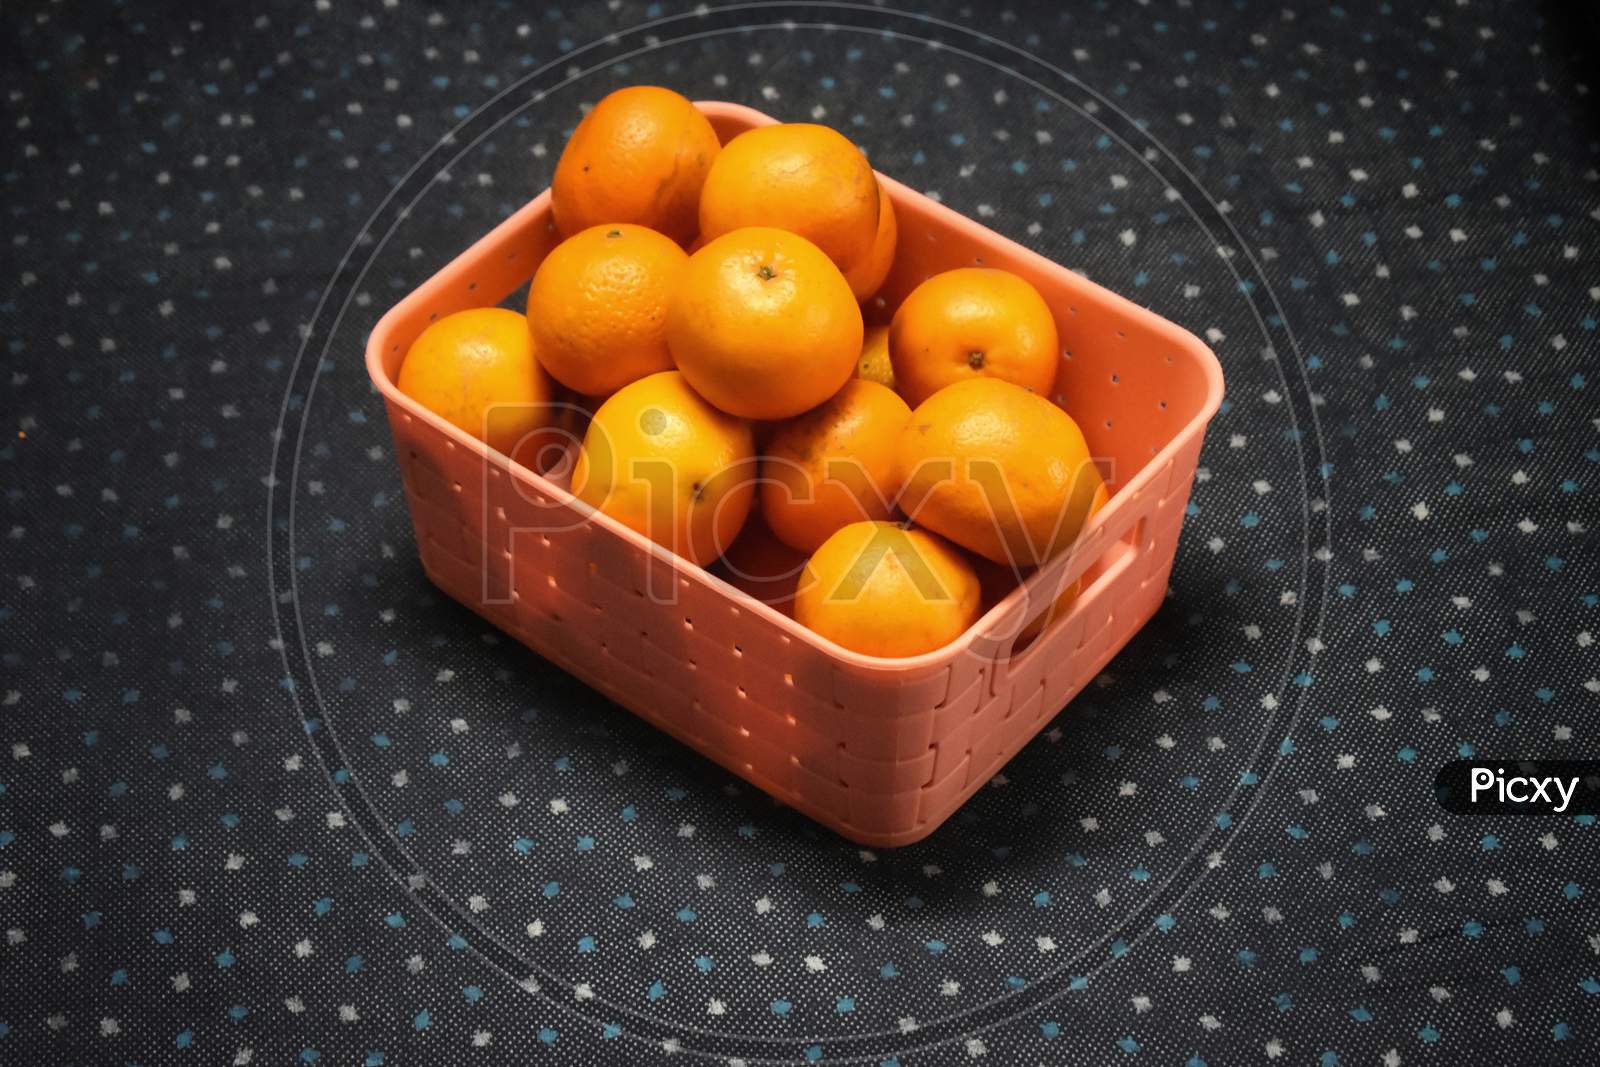 A Wicker Basket Full Of Fresh Orange Fruits, Isolated On A Blue And White Dotted Background.